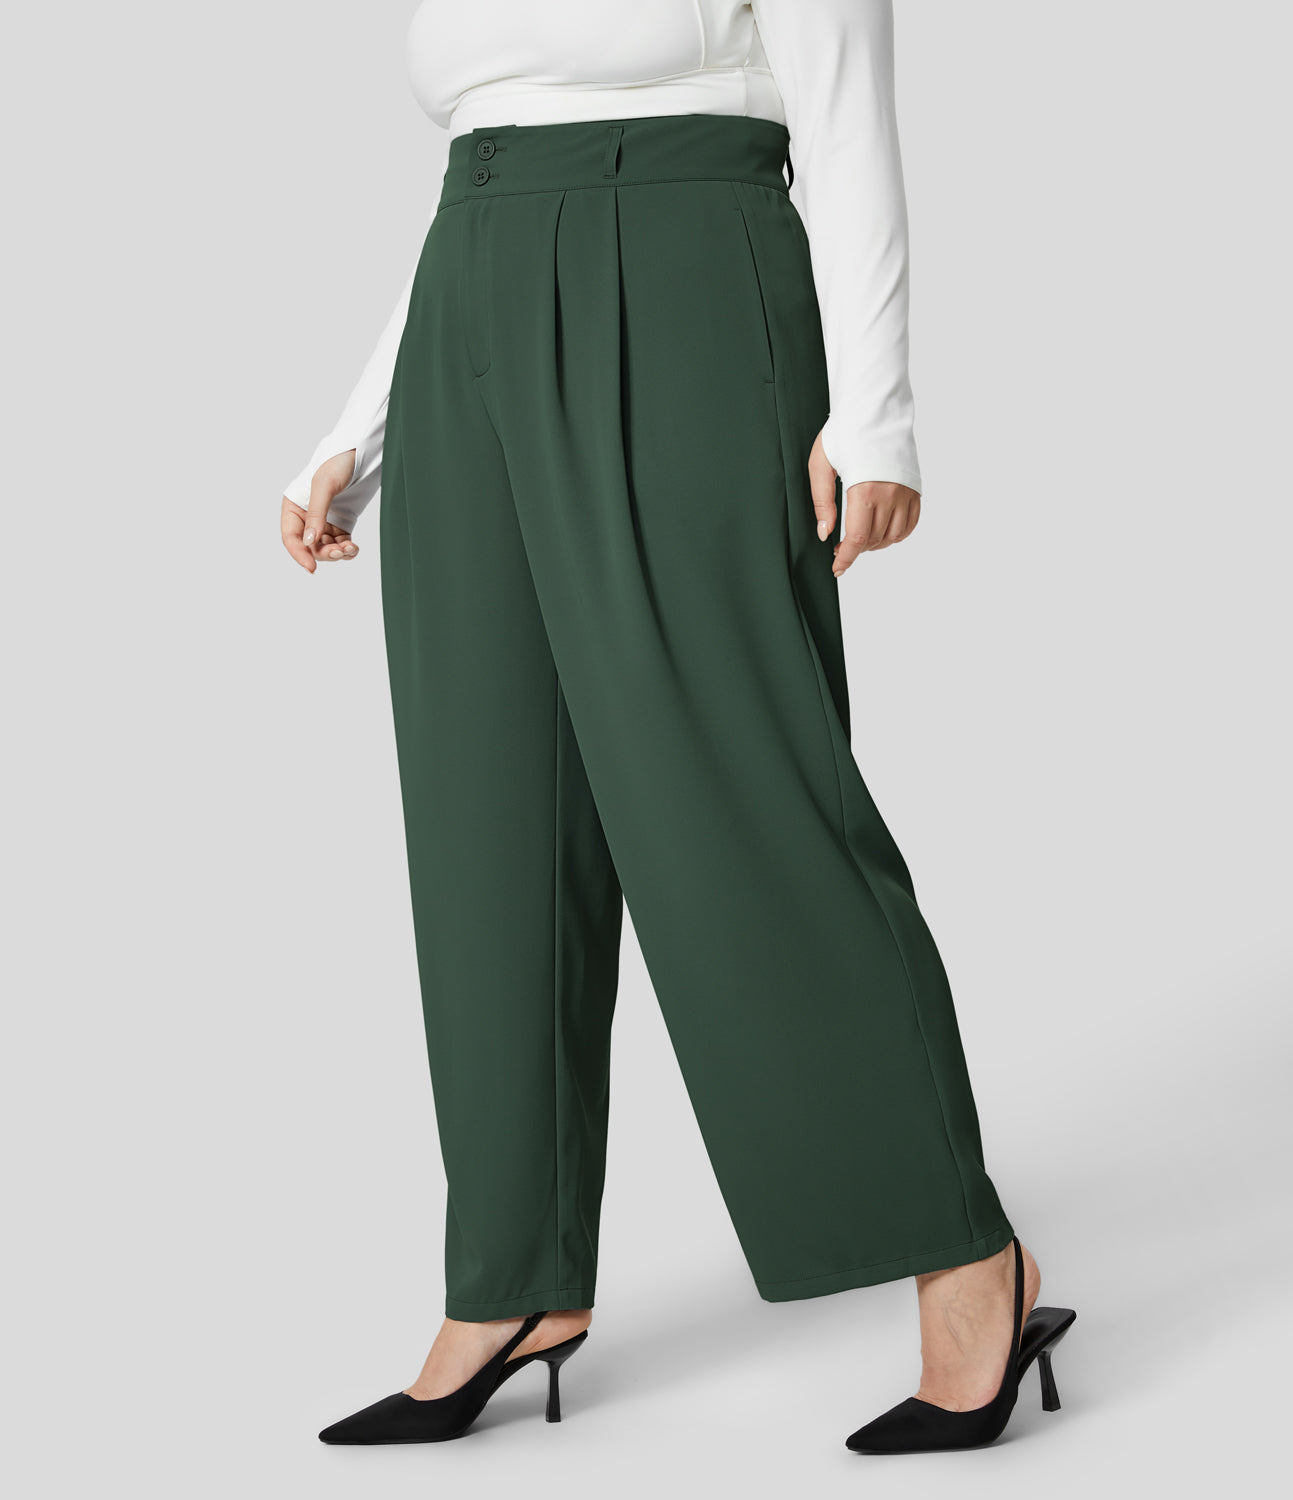 

Halara High Waisted Button Zipper Plicated Side Pocket Shirred Straight Leg Work Plus Size Suit Pants - Sycamore